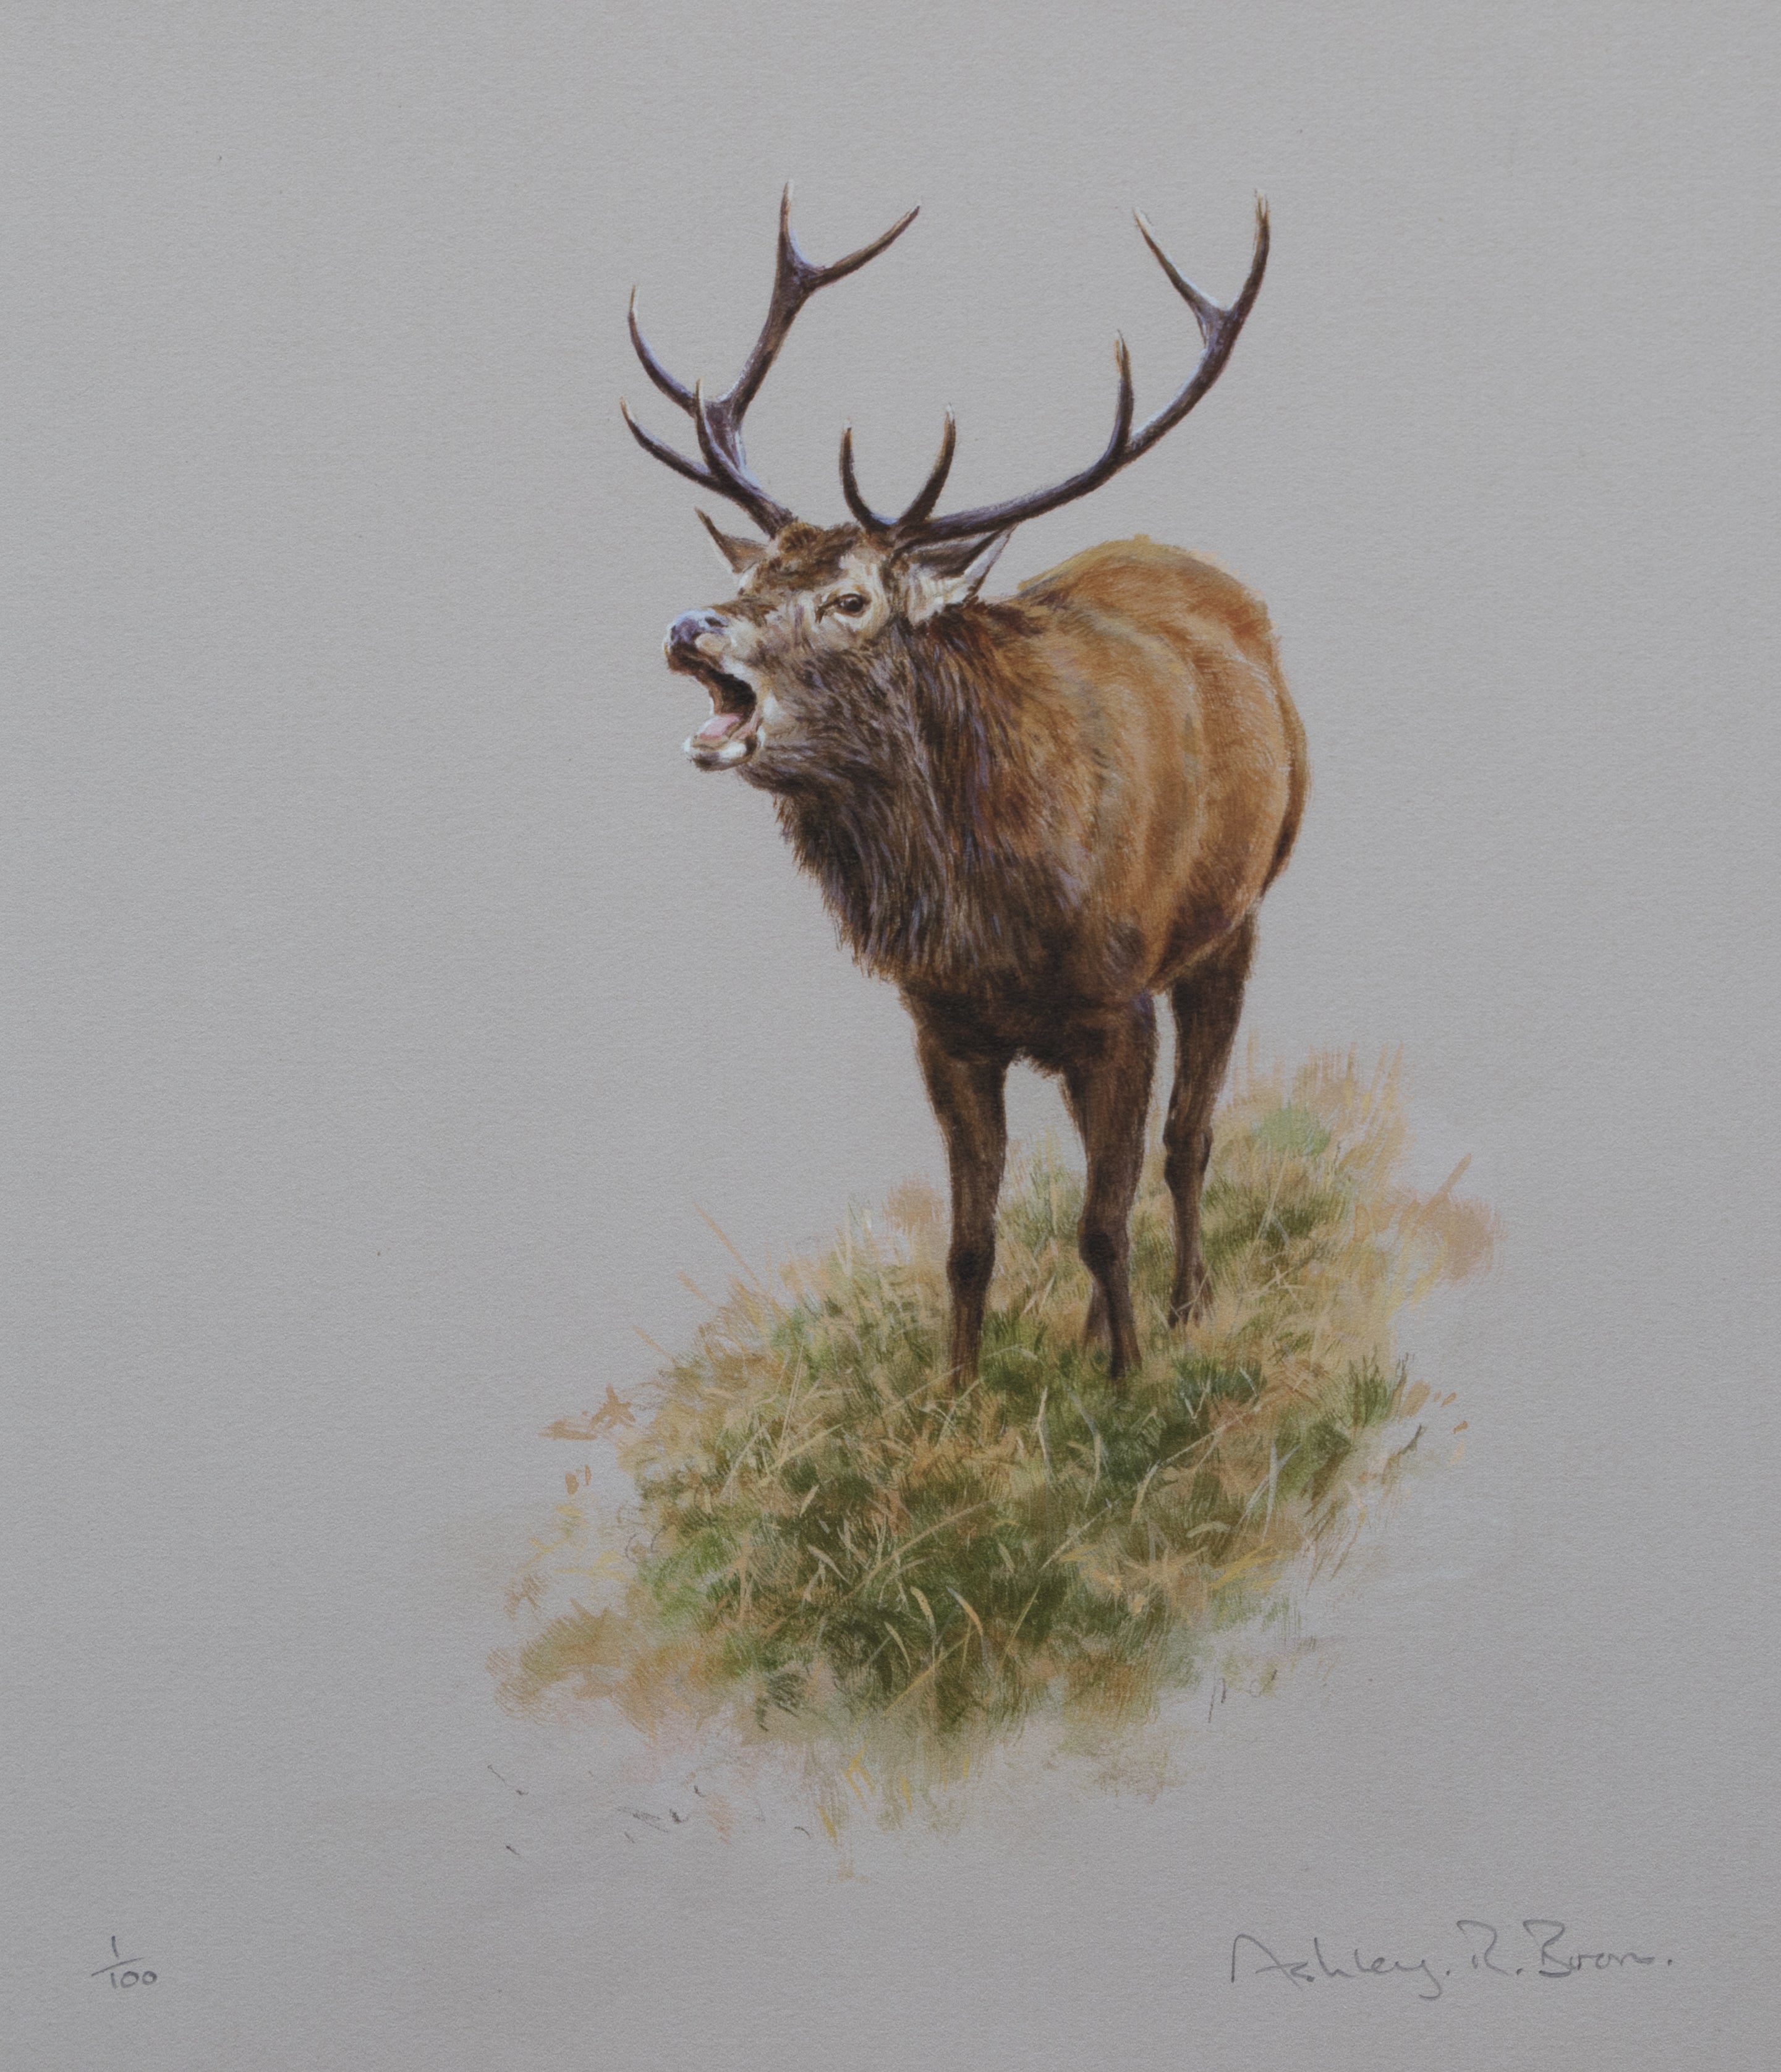 018. 'Roaring Stag' Limited Edition Print (100 only) by Ashley Boon - 11" x 8.5"